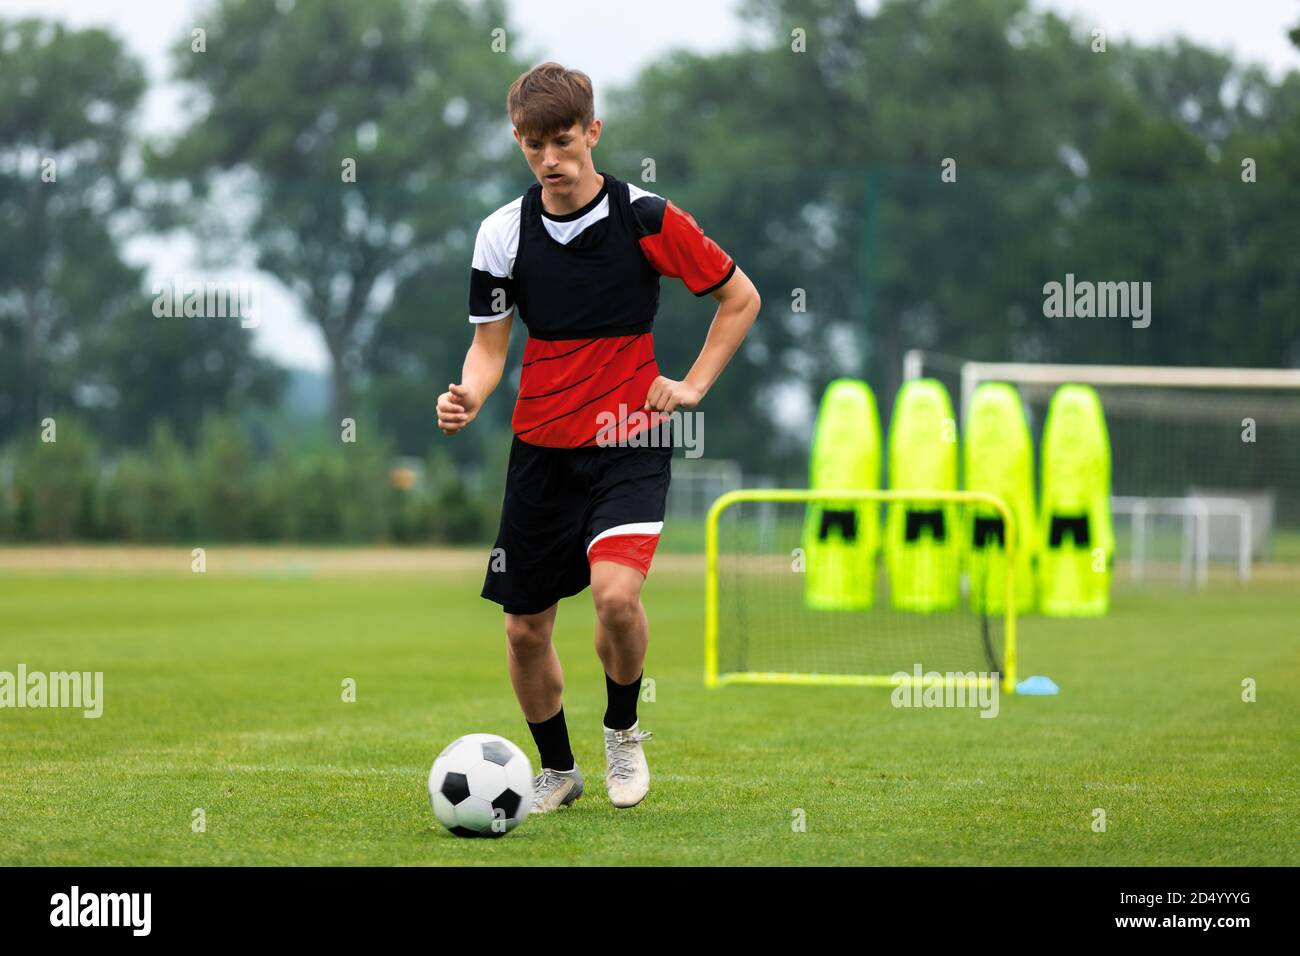 Youth Soccer Training. Young Player on Drills, Exercises And Match Preparation Training Session. Soccer Player Running With Ball. Training Goal and Fo Stock Photo